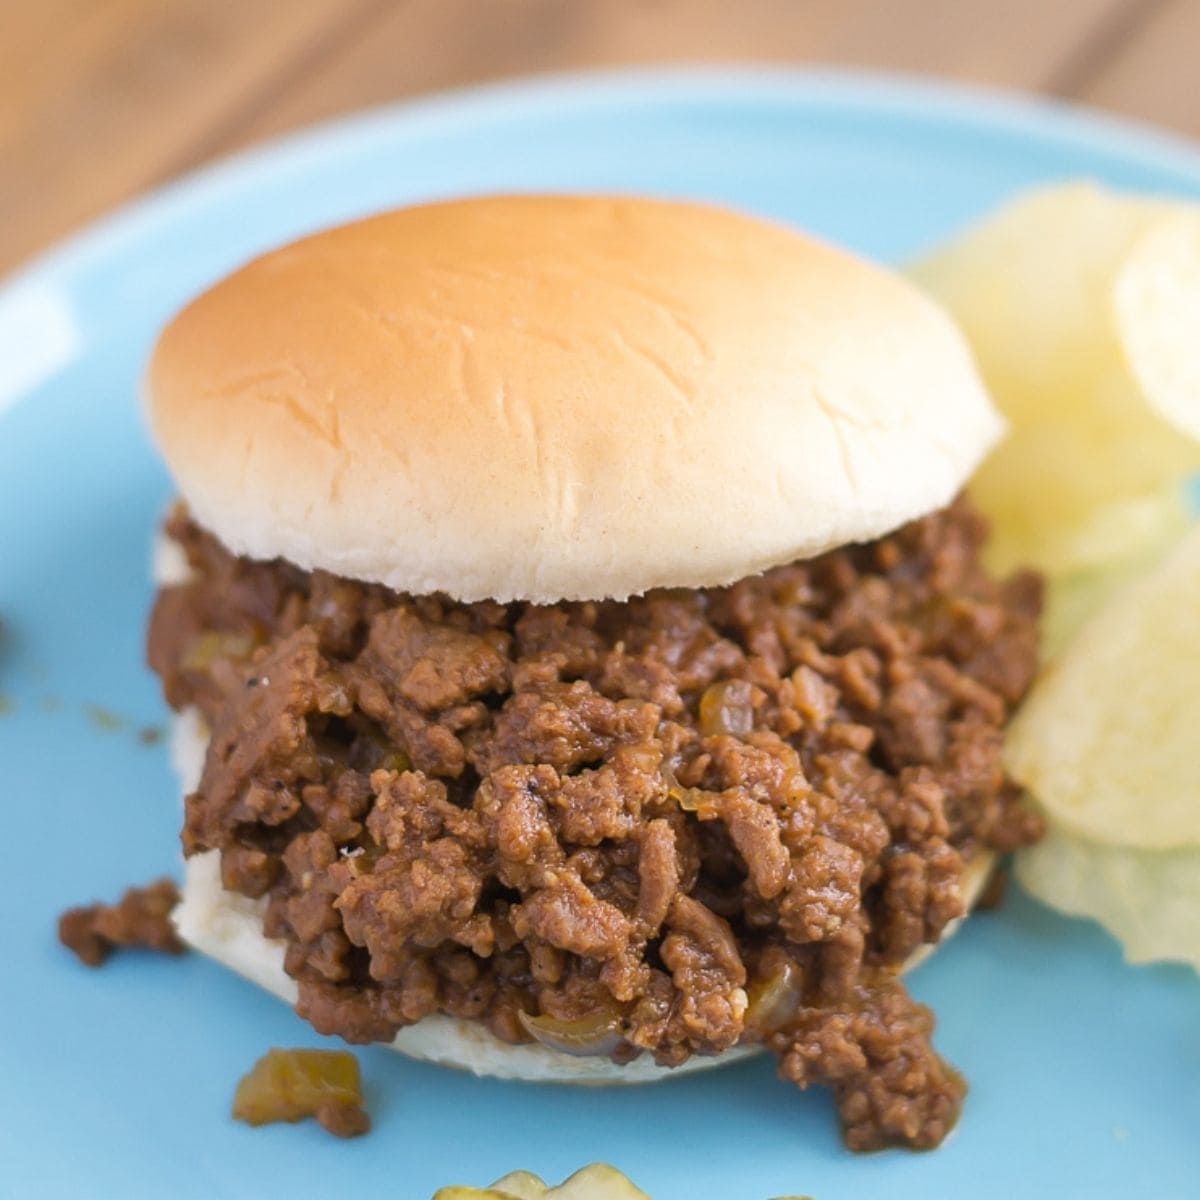 Crock Pot Sloppy Joes on a plate served with chips.